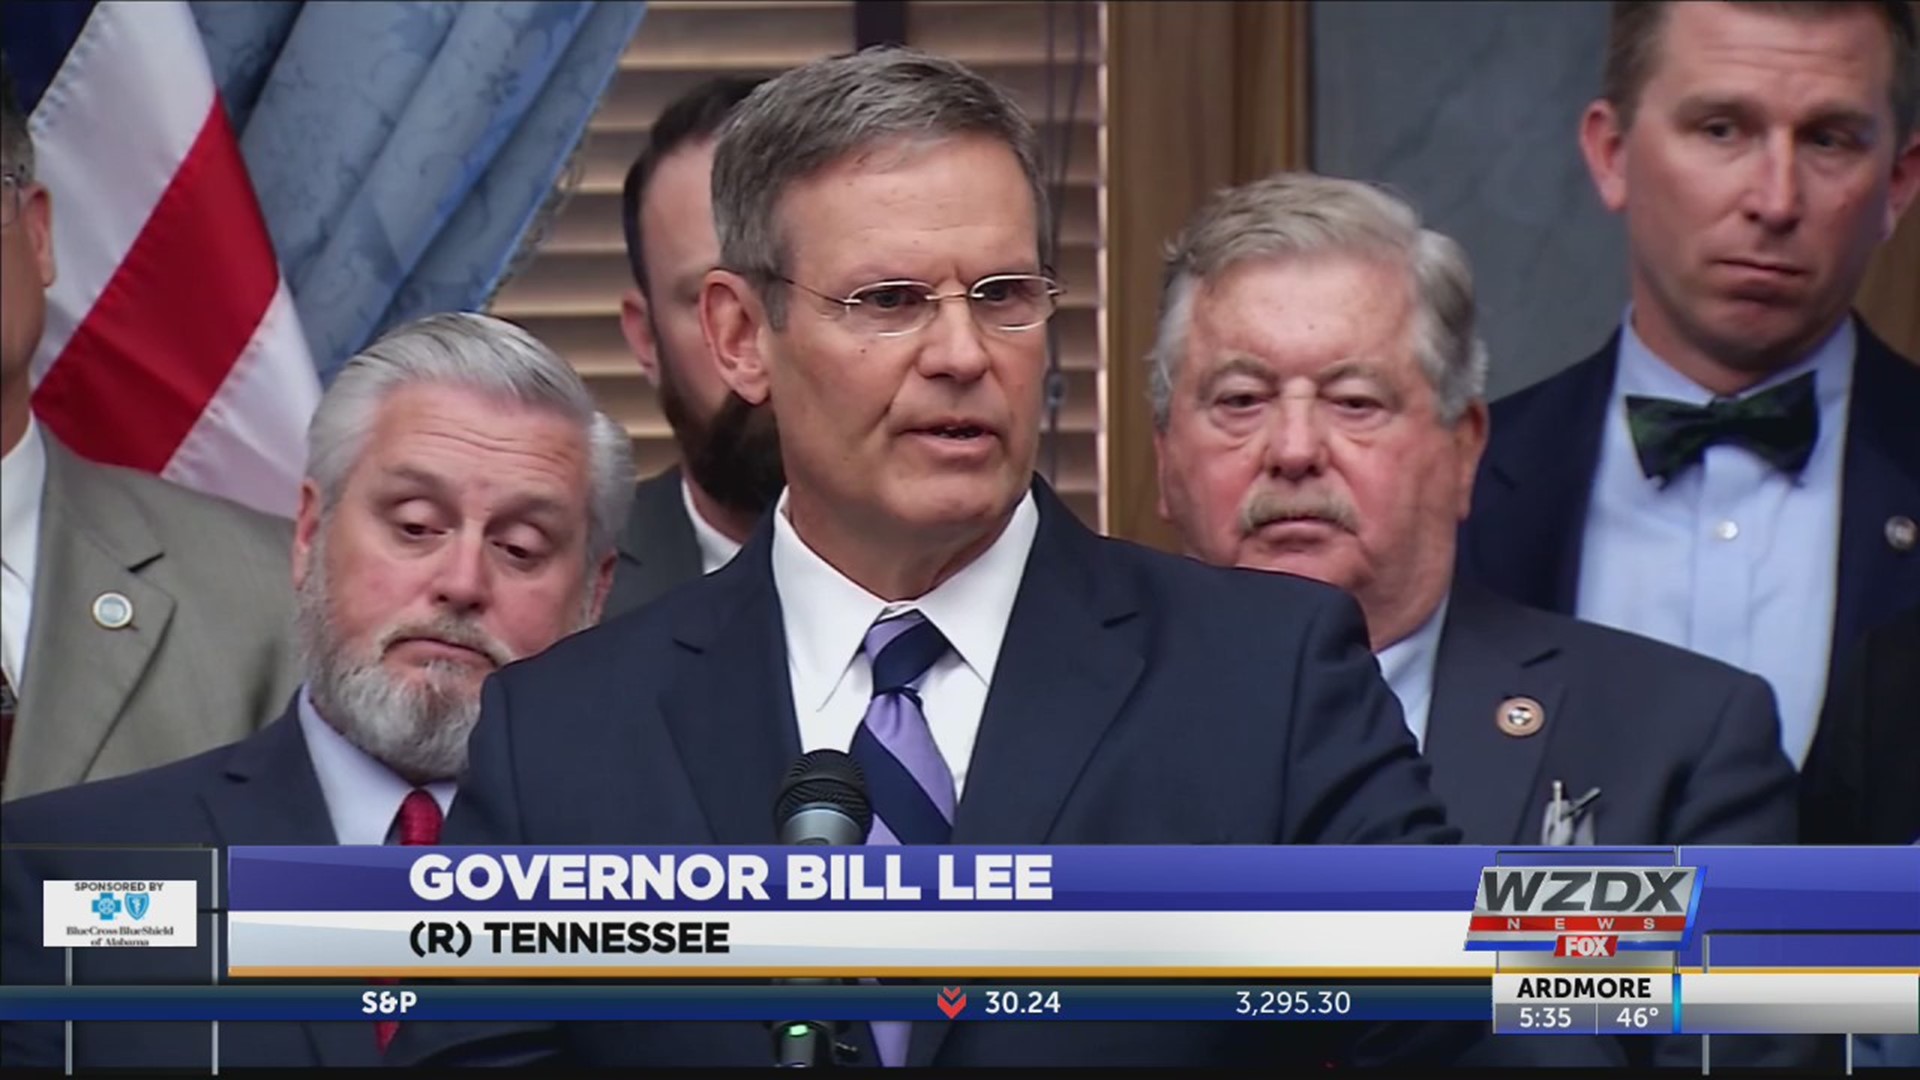 Tennessee governor Bill Lee says he wants to enact some of the strictest abortion laws in the nation. Lee said he'll soon introduce legislation that will ban most abortions once a fetal heartbeat is detected, or about six weeks into pregnancy, and before many women know they're pregnant.